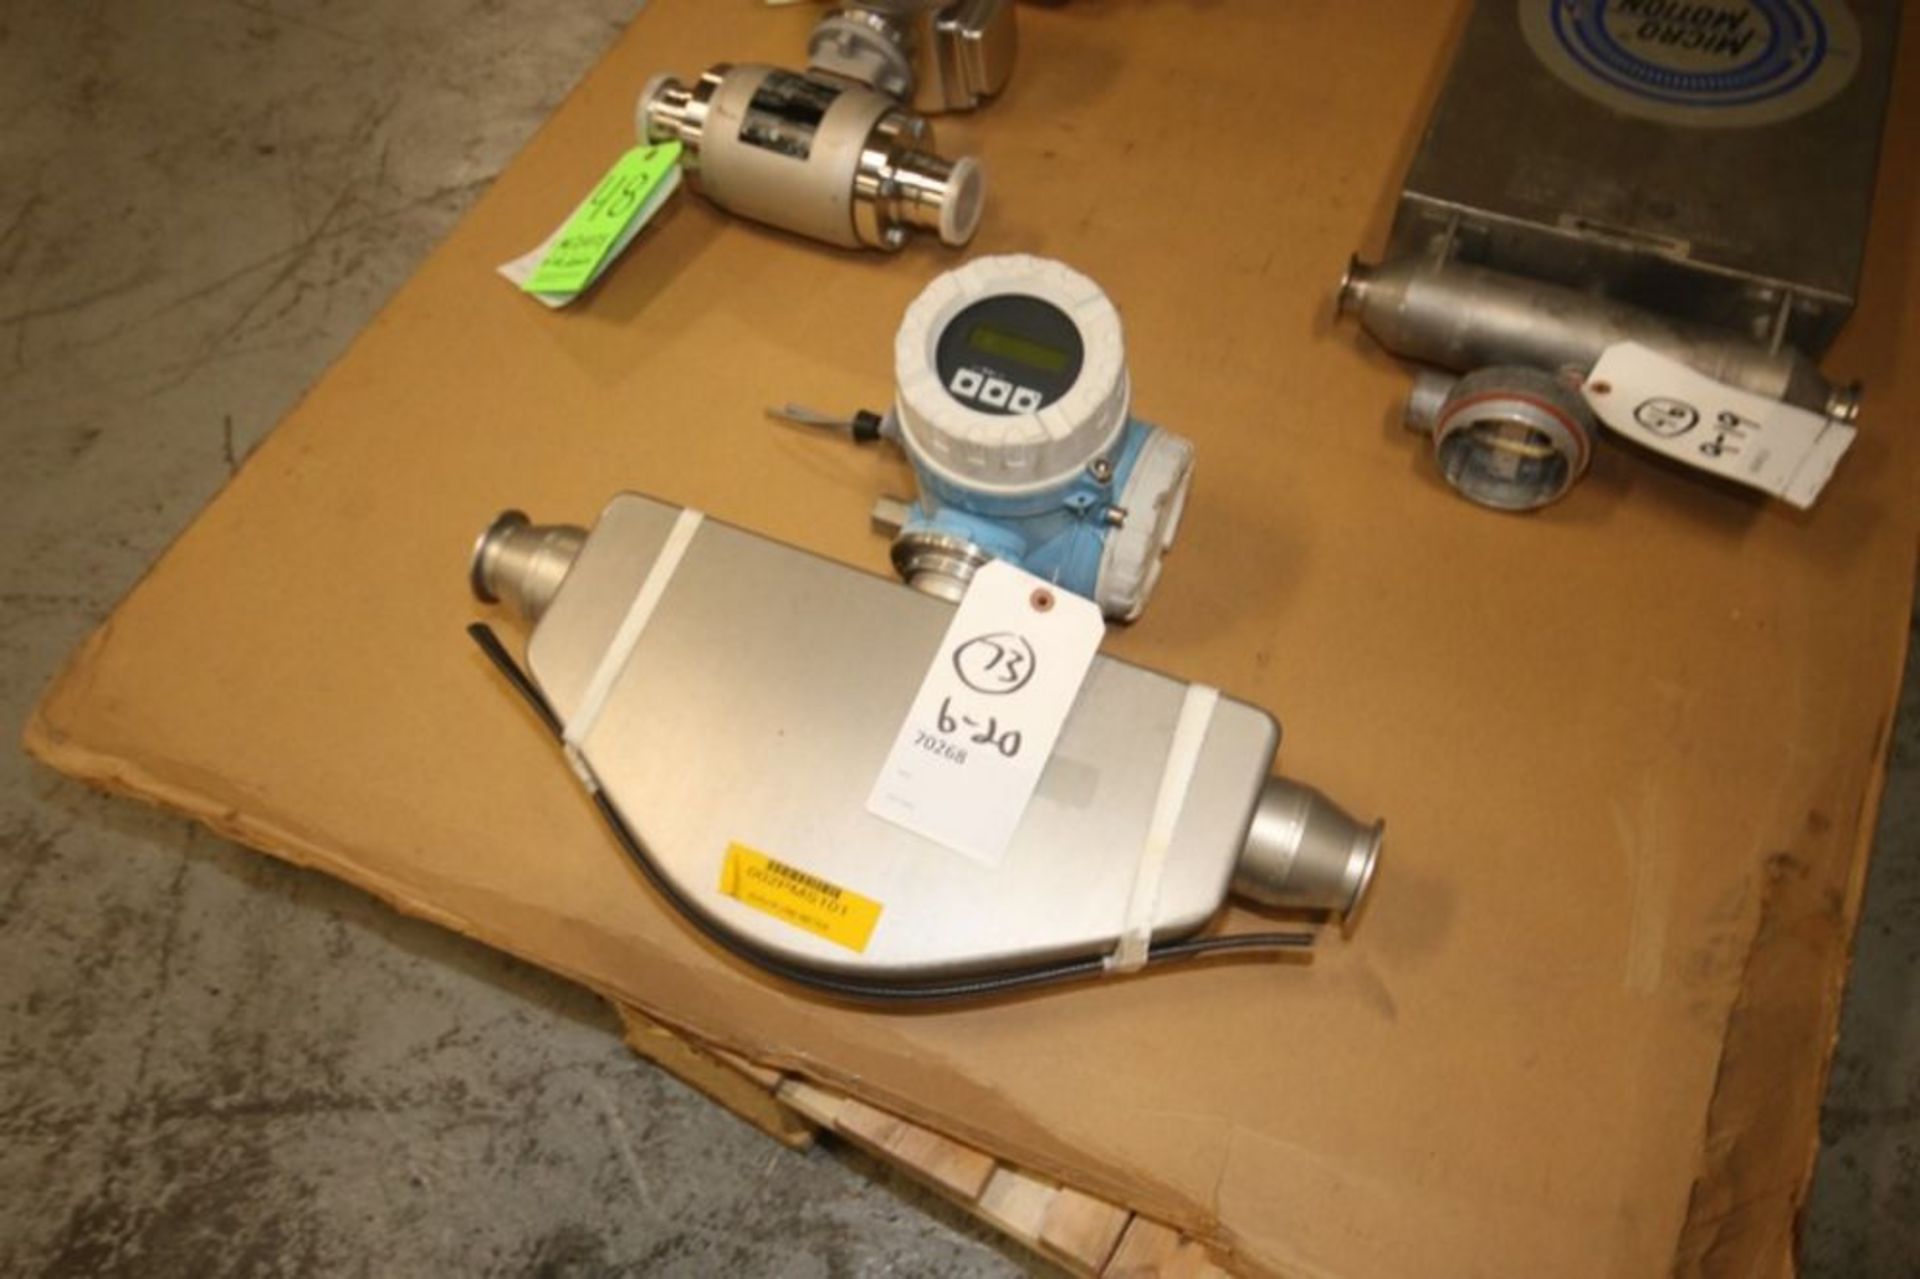 Endress+Hauser Flow Meter, M/N PROMASS 80, Order Code: 80E50-AFTSAARABBA8, with Aprox. 2" Clamp Type - Image 2 of 5